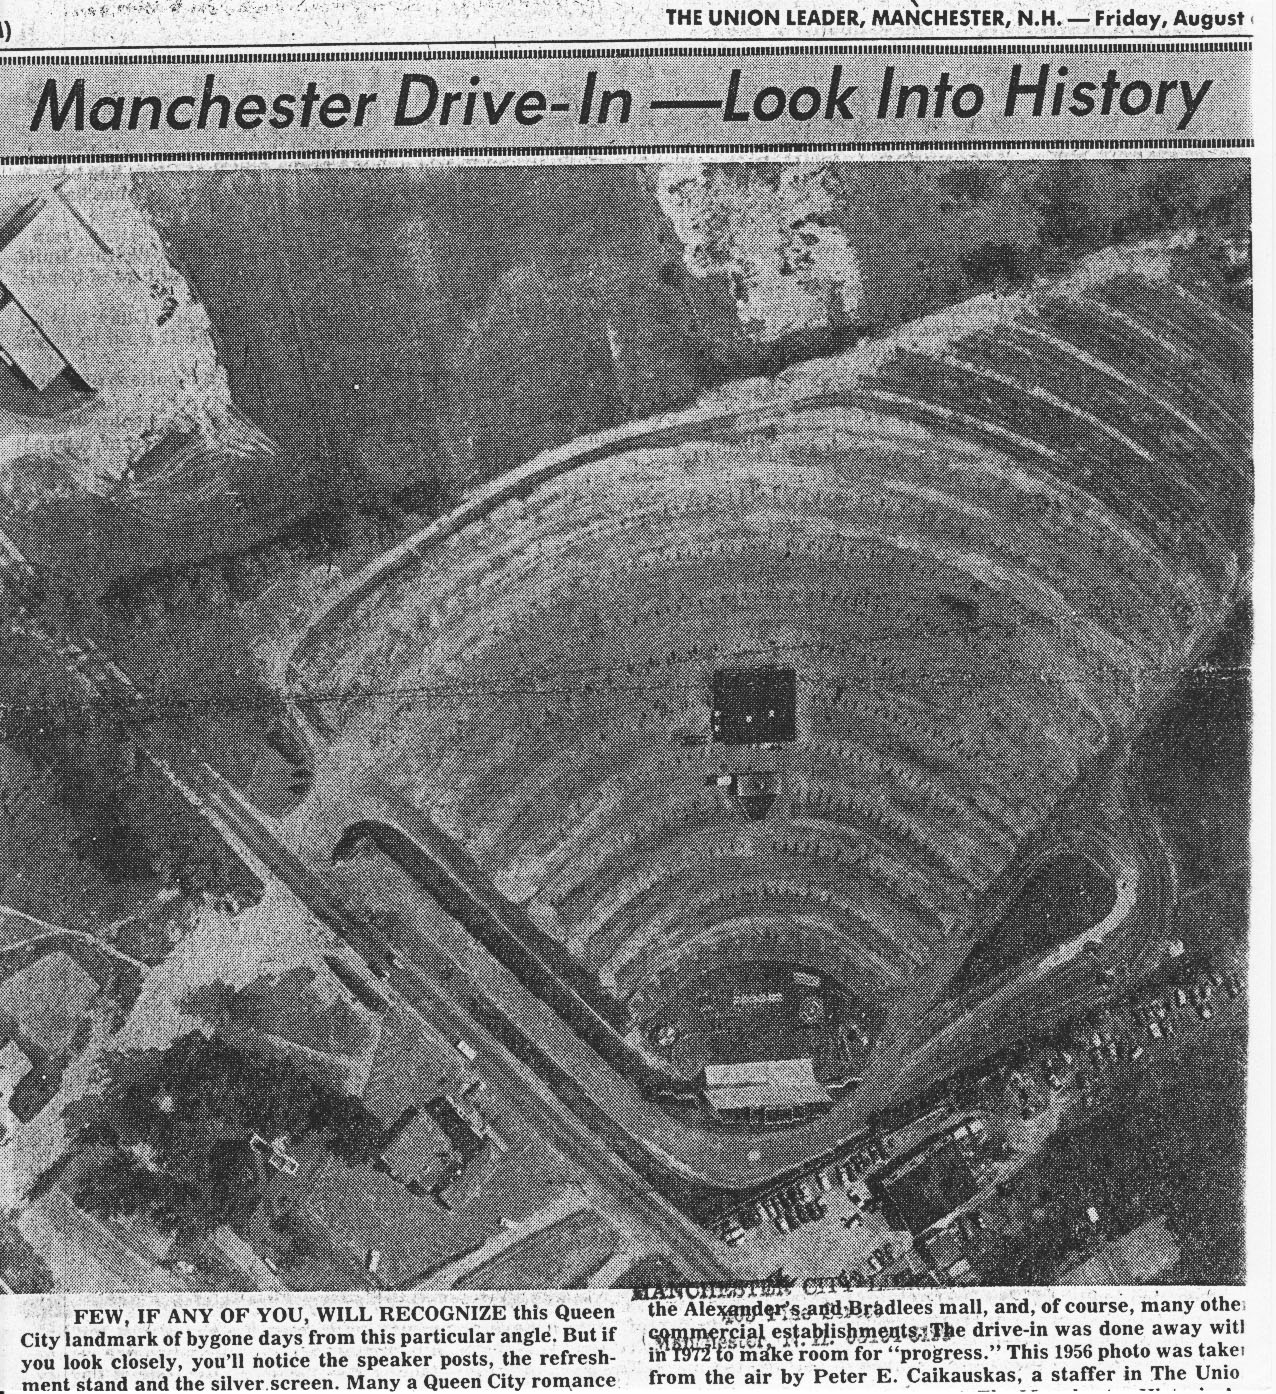 Aerial View of the Manchester Drive In Theatre